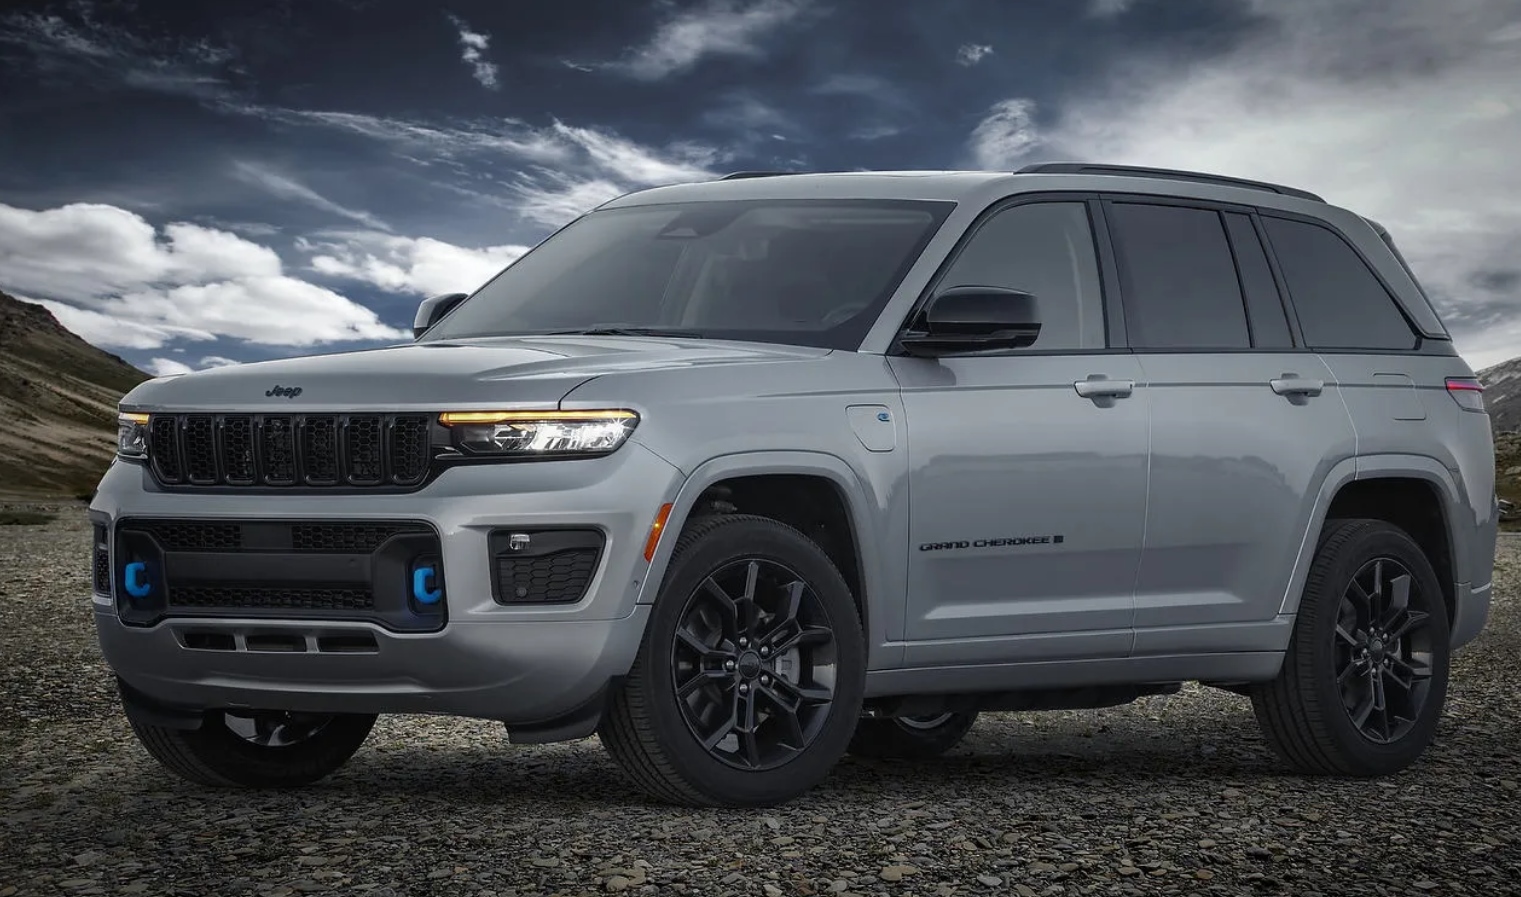 2025 Jeep Grand Cherokee SRT Specs, Price, Review Inside The Hood